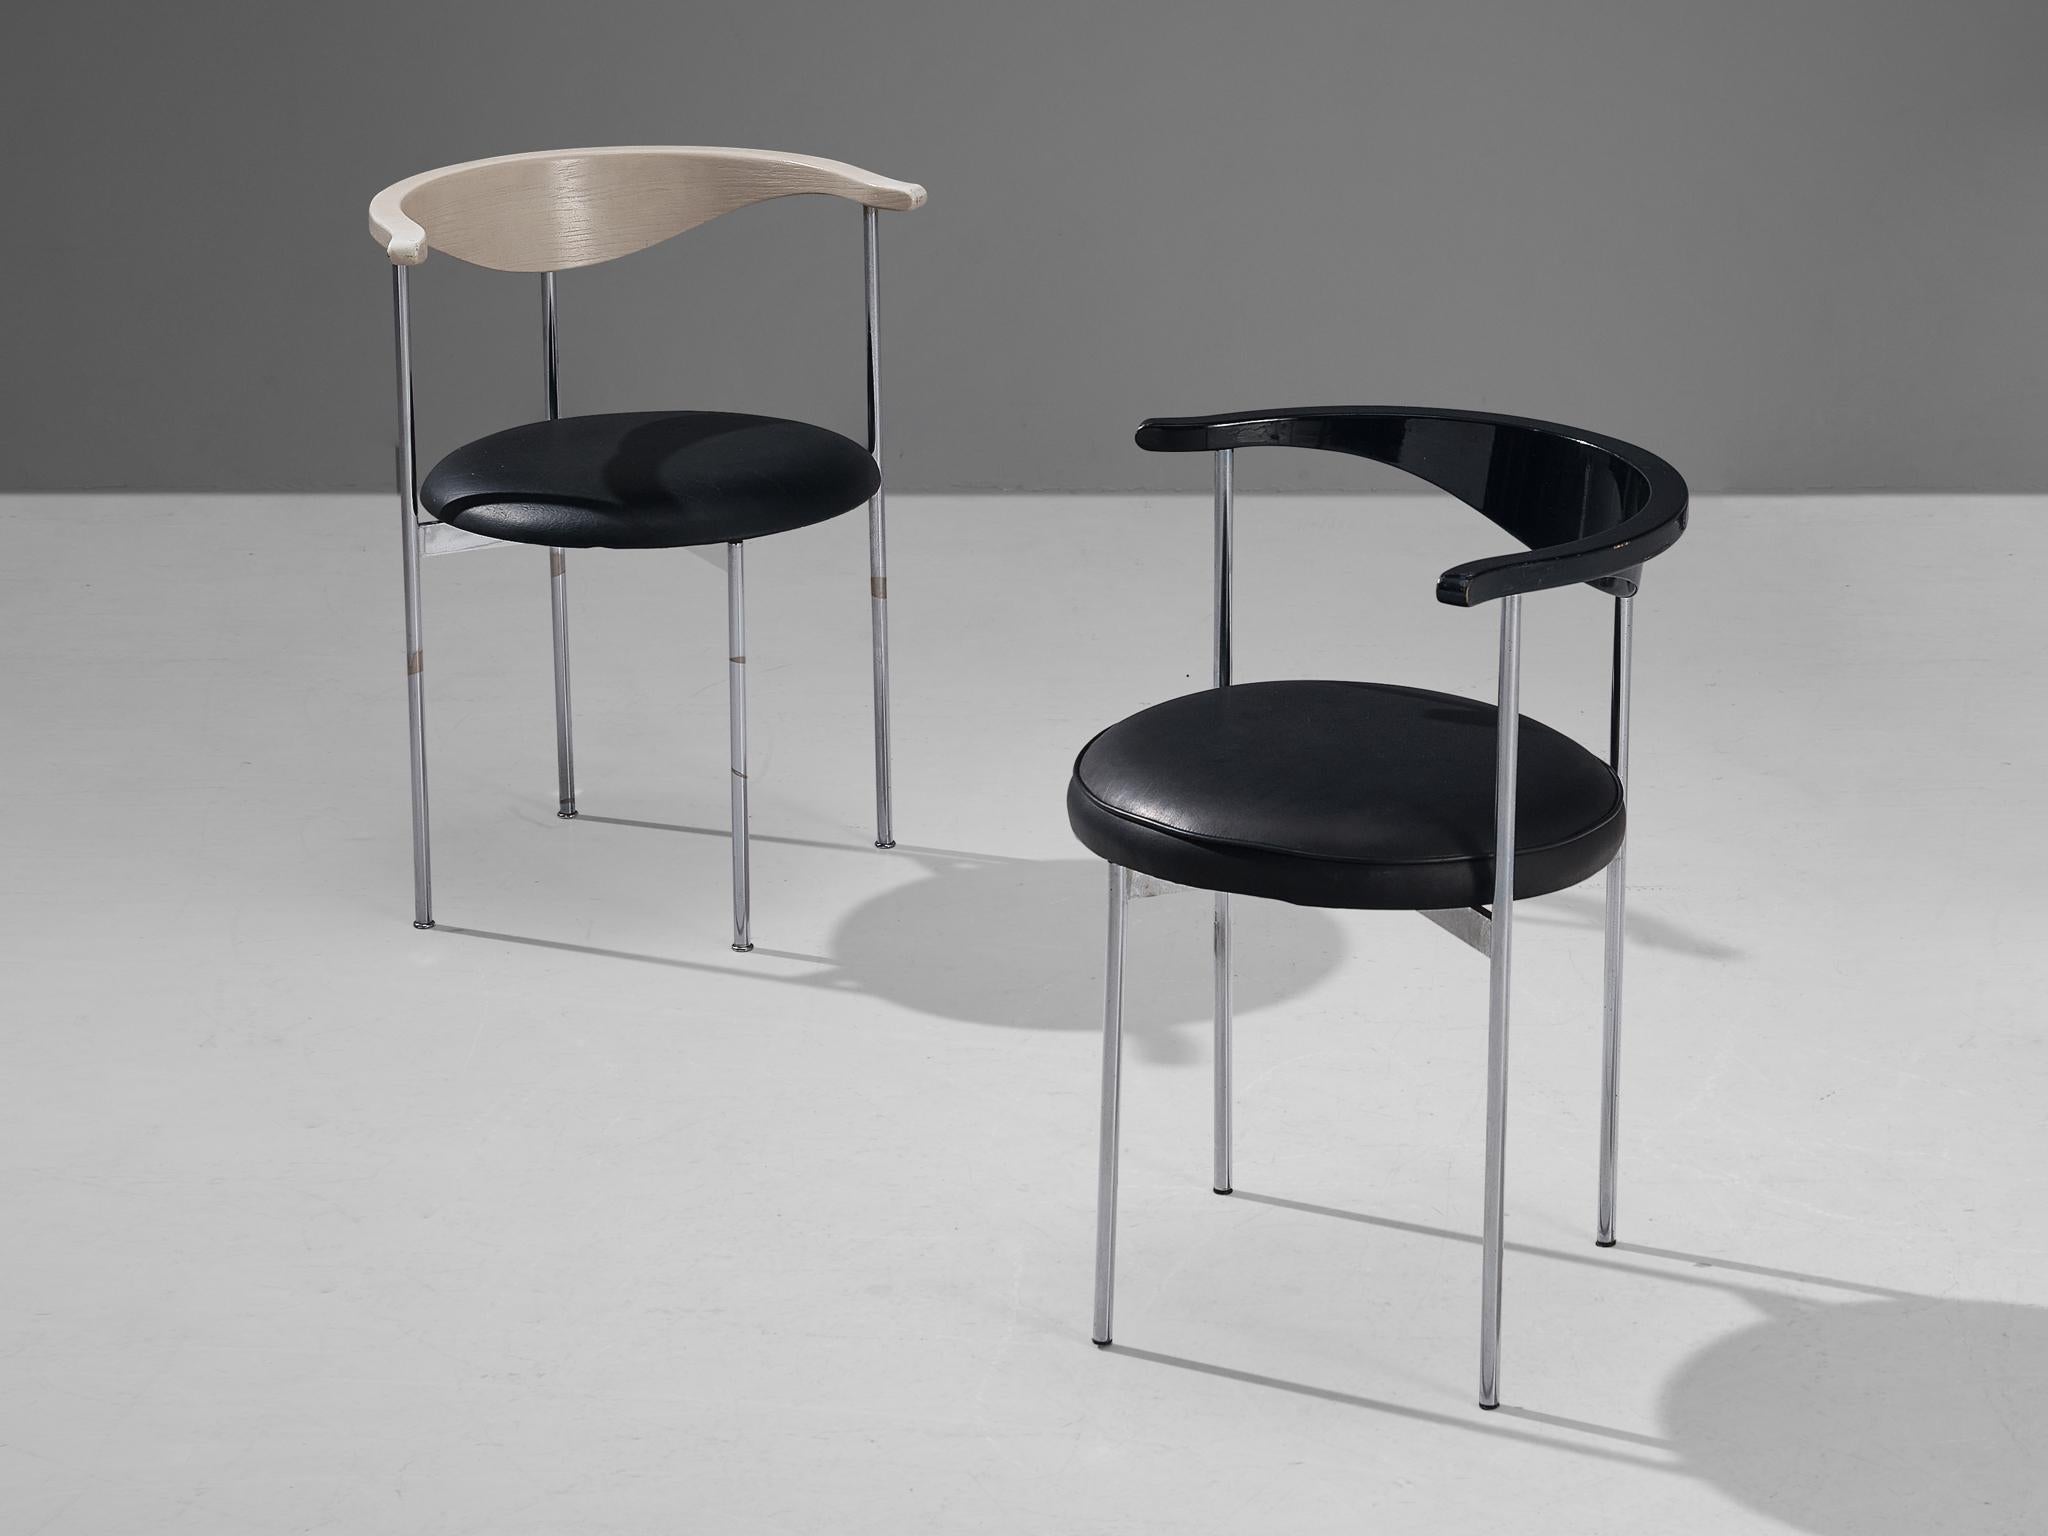 Frederik Sieck Pair of Chairs in Black and White